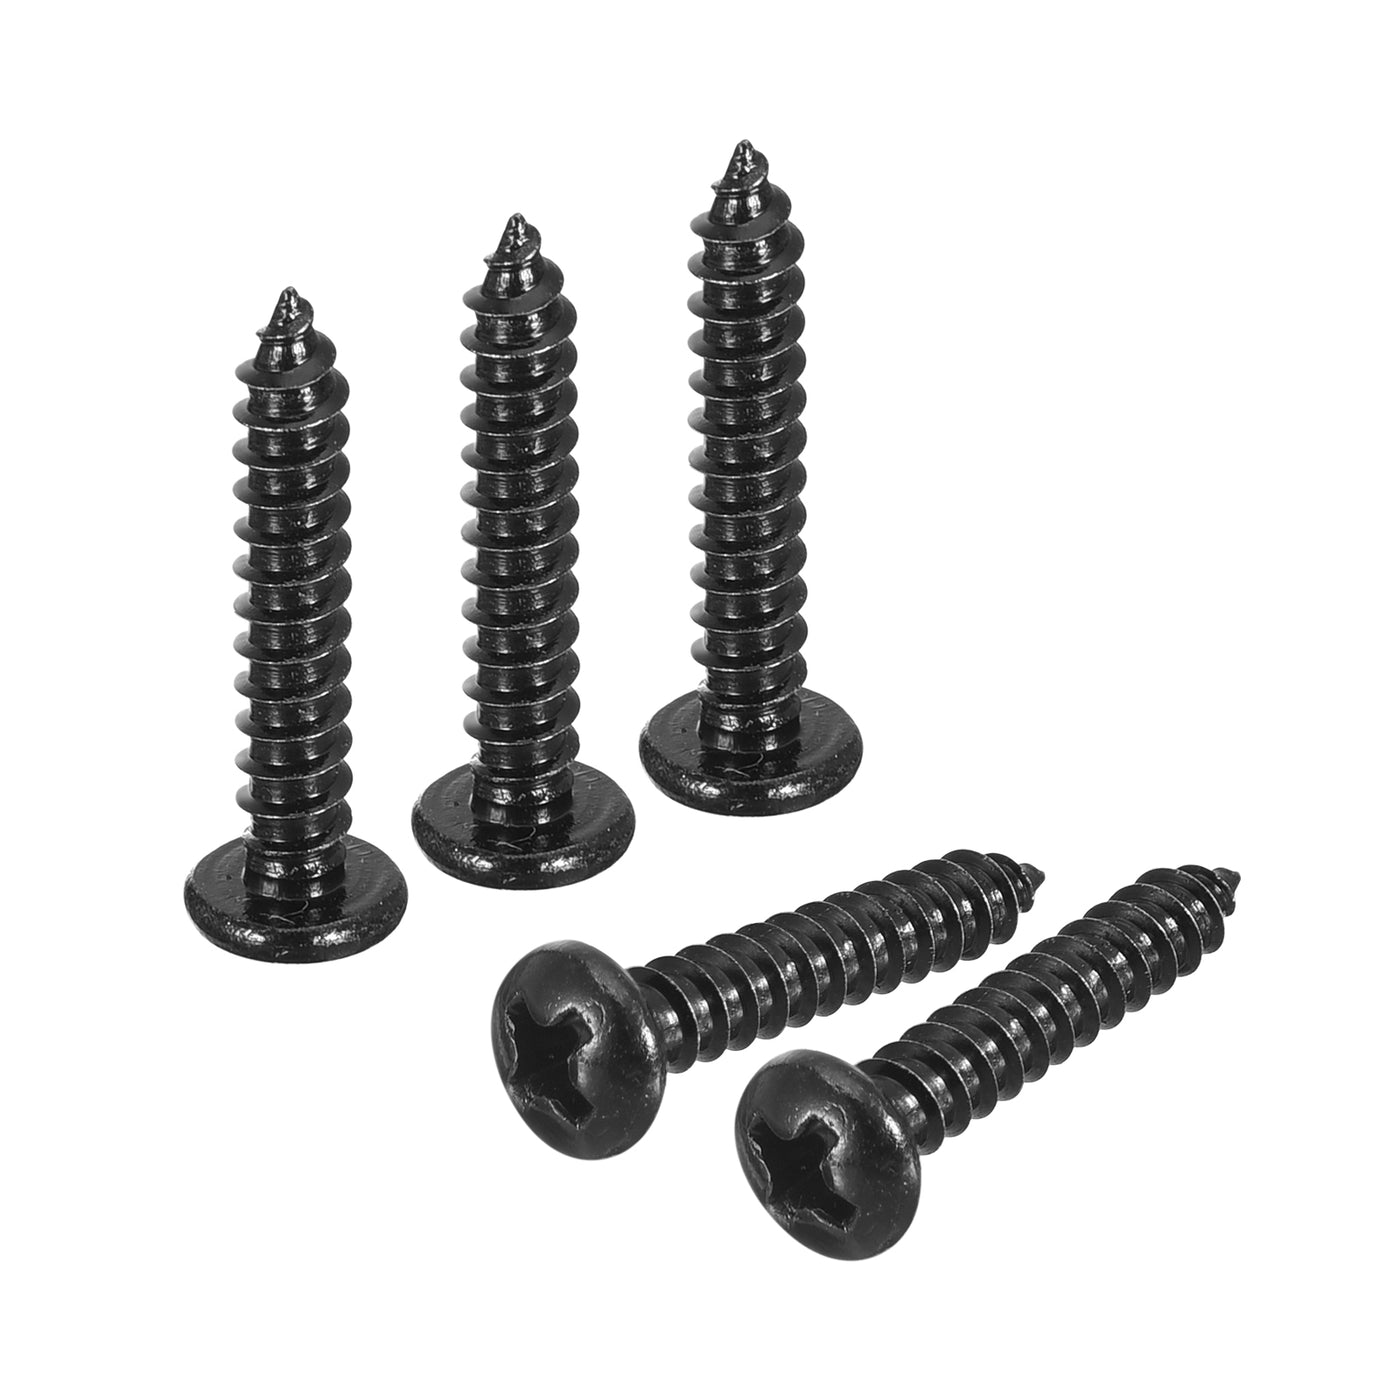 uxcell Uxcell #6 x 3/4" Phillips Pan Head Self-tapping Screw, 50pcs - 304 Stainless Steel Round Head Wood Screw Full Thread (Black)